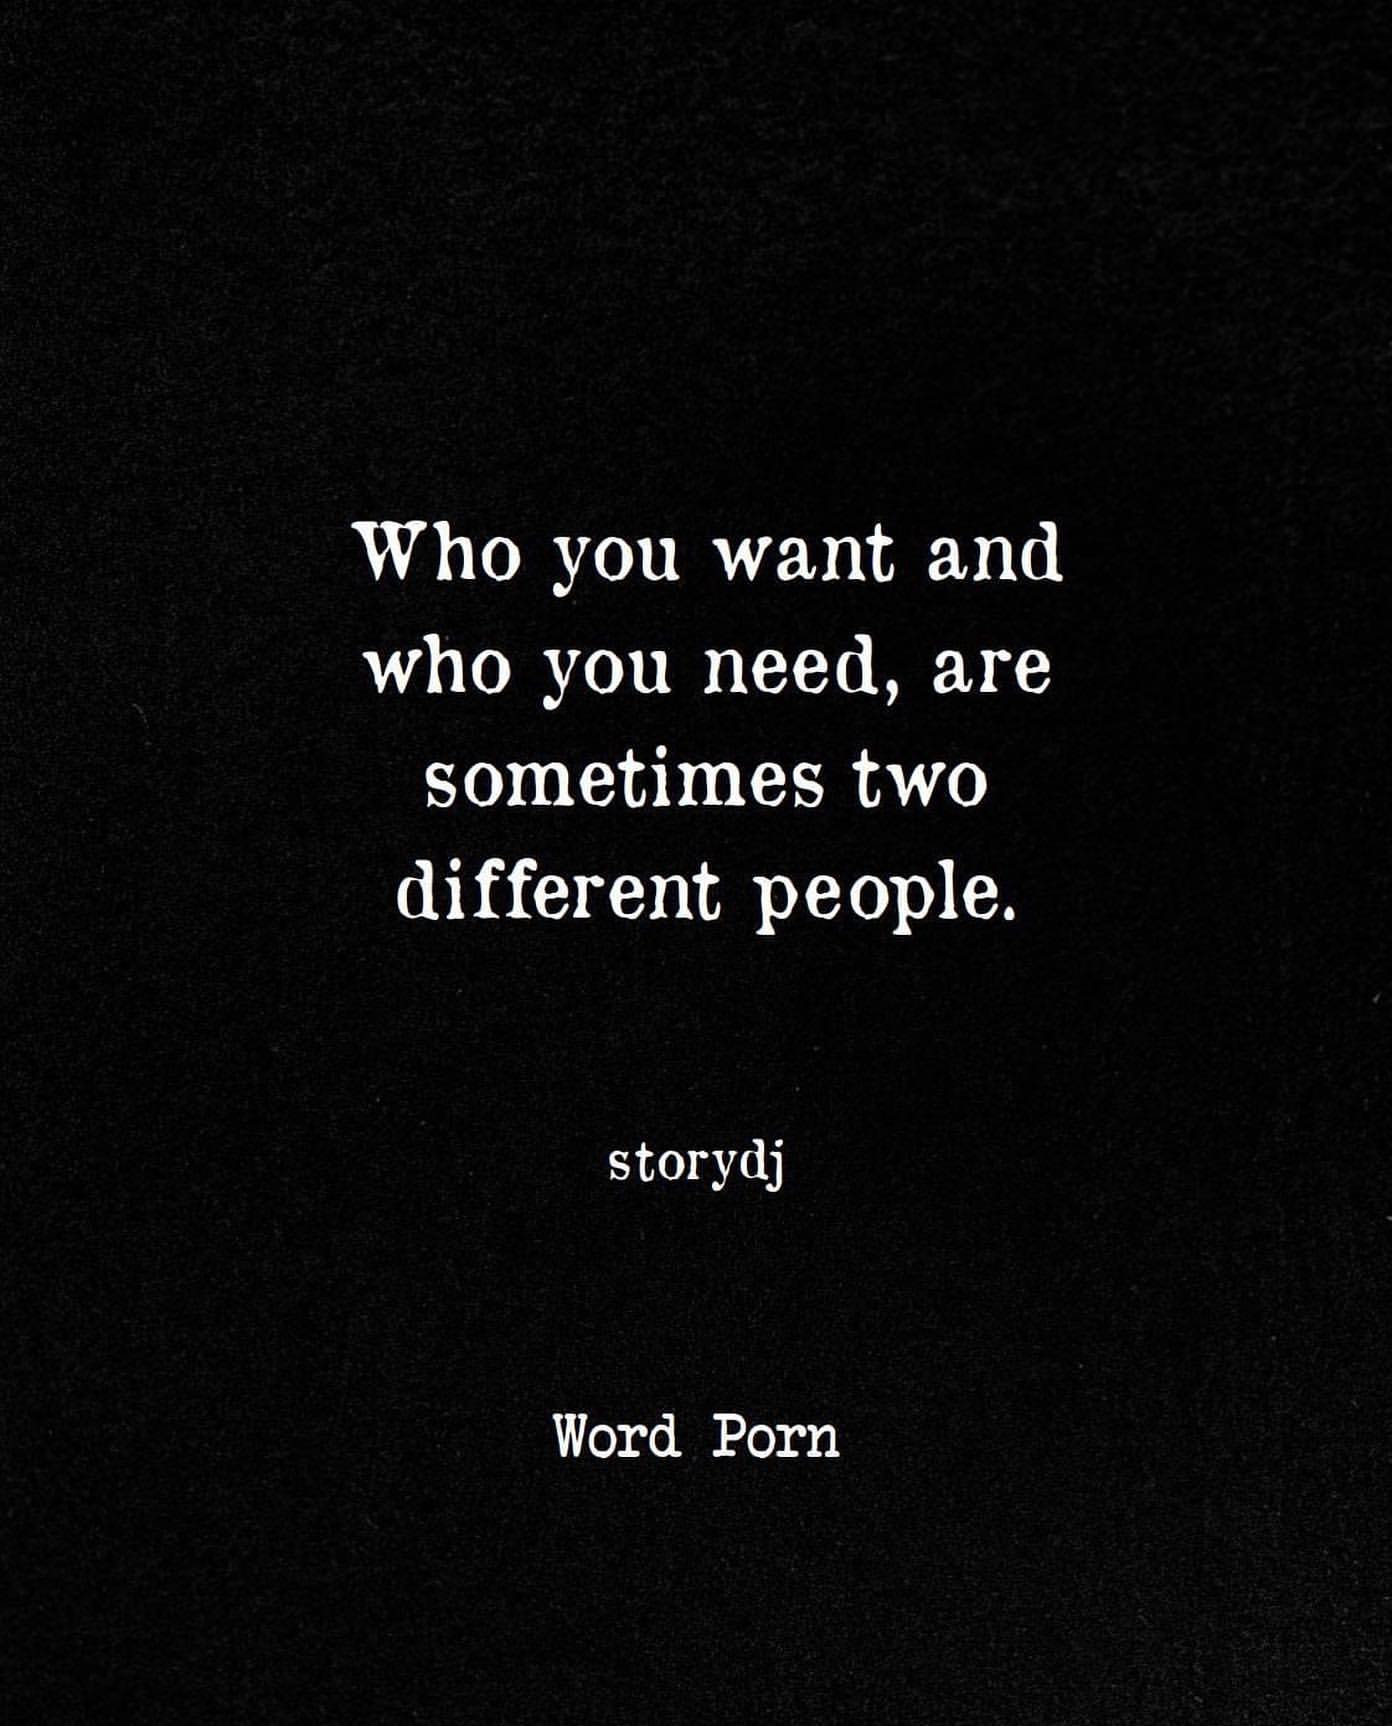 Who you want and who you need, are sometimes two different people.